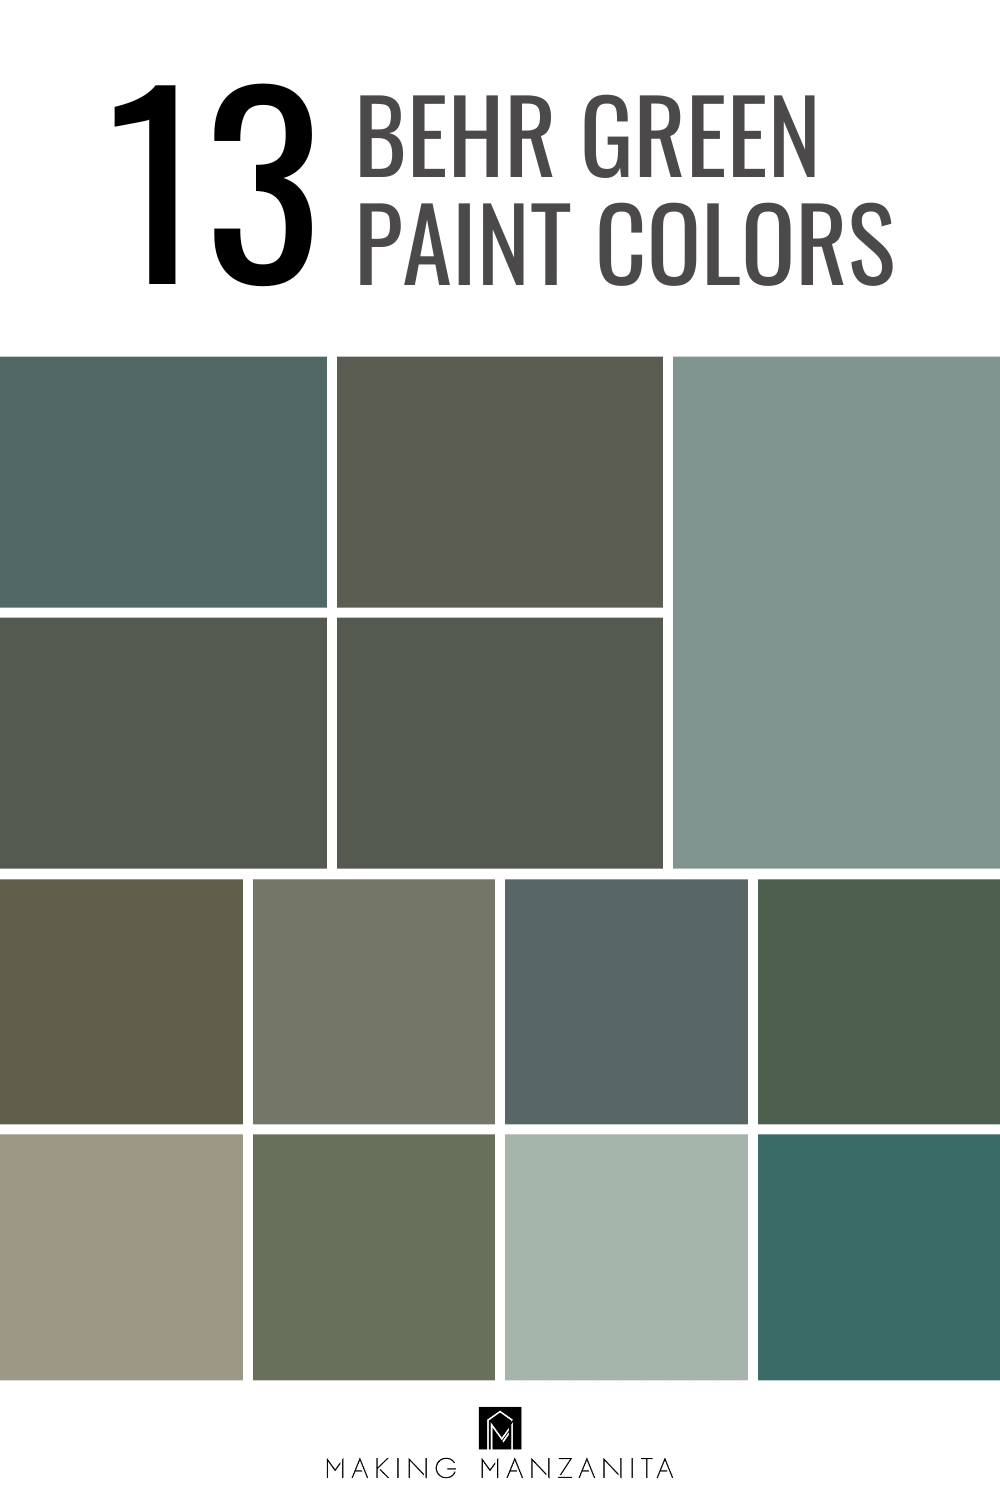 13 of the Best BEHR Green Paint Colors Making Manzanita